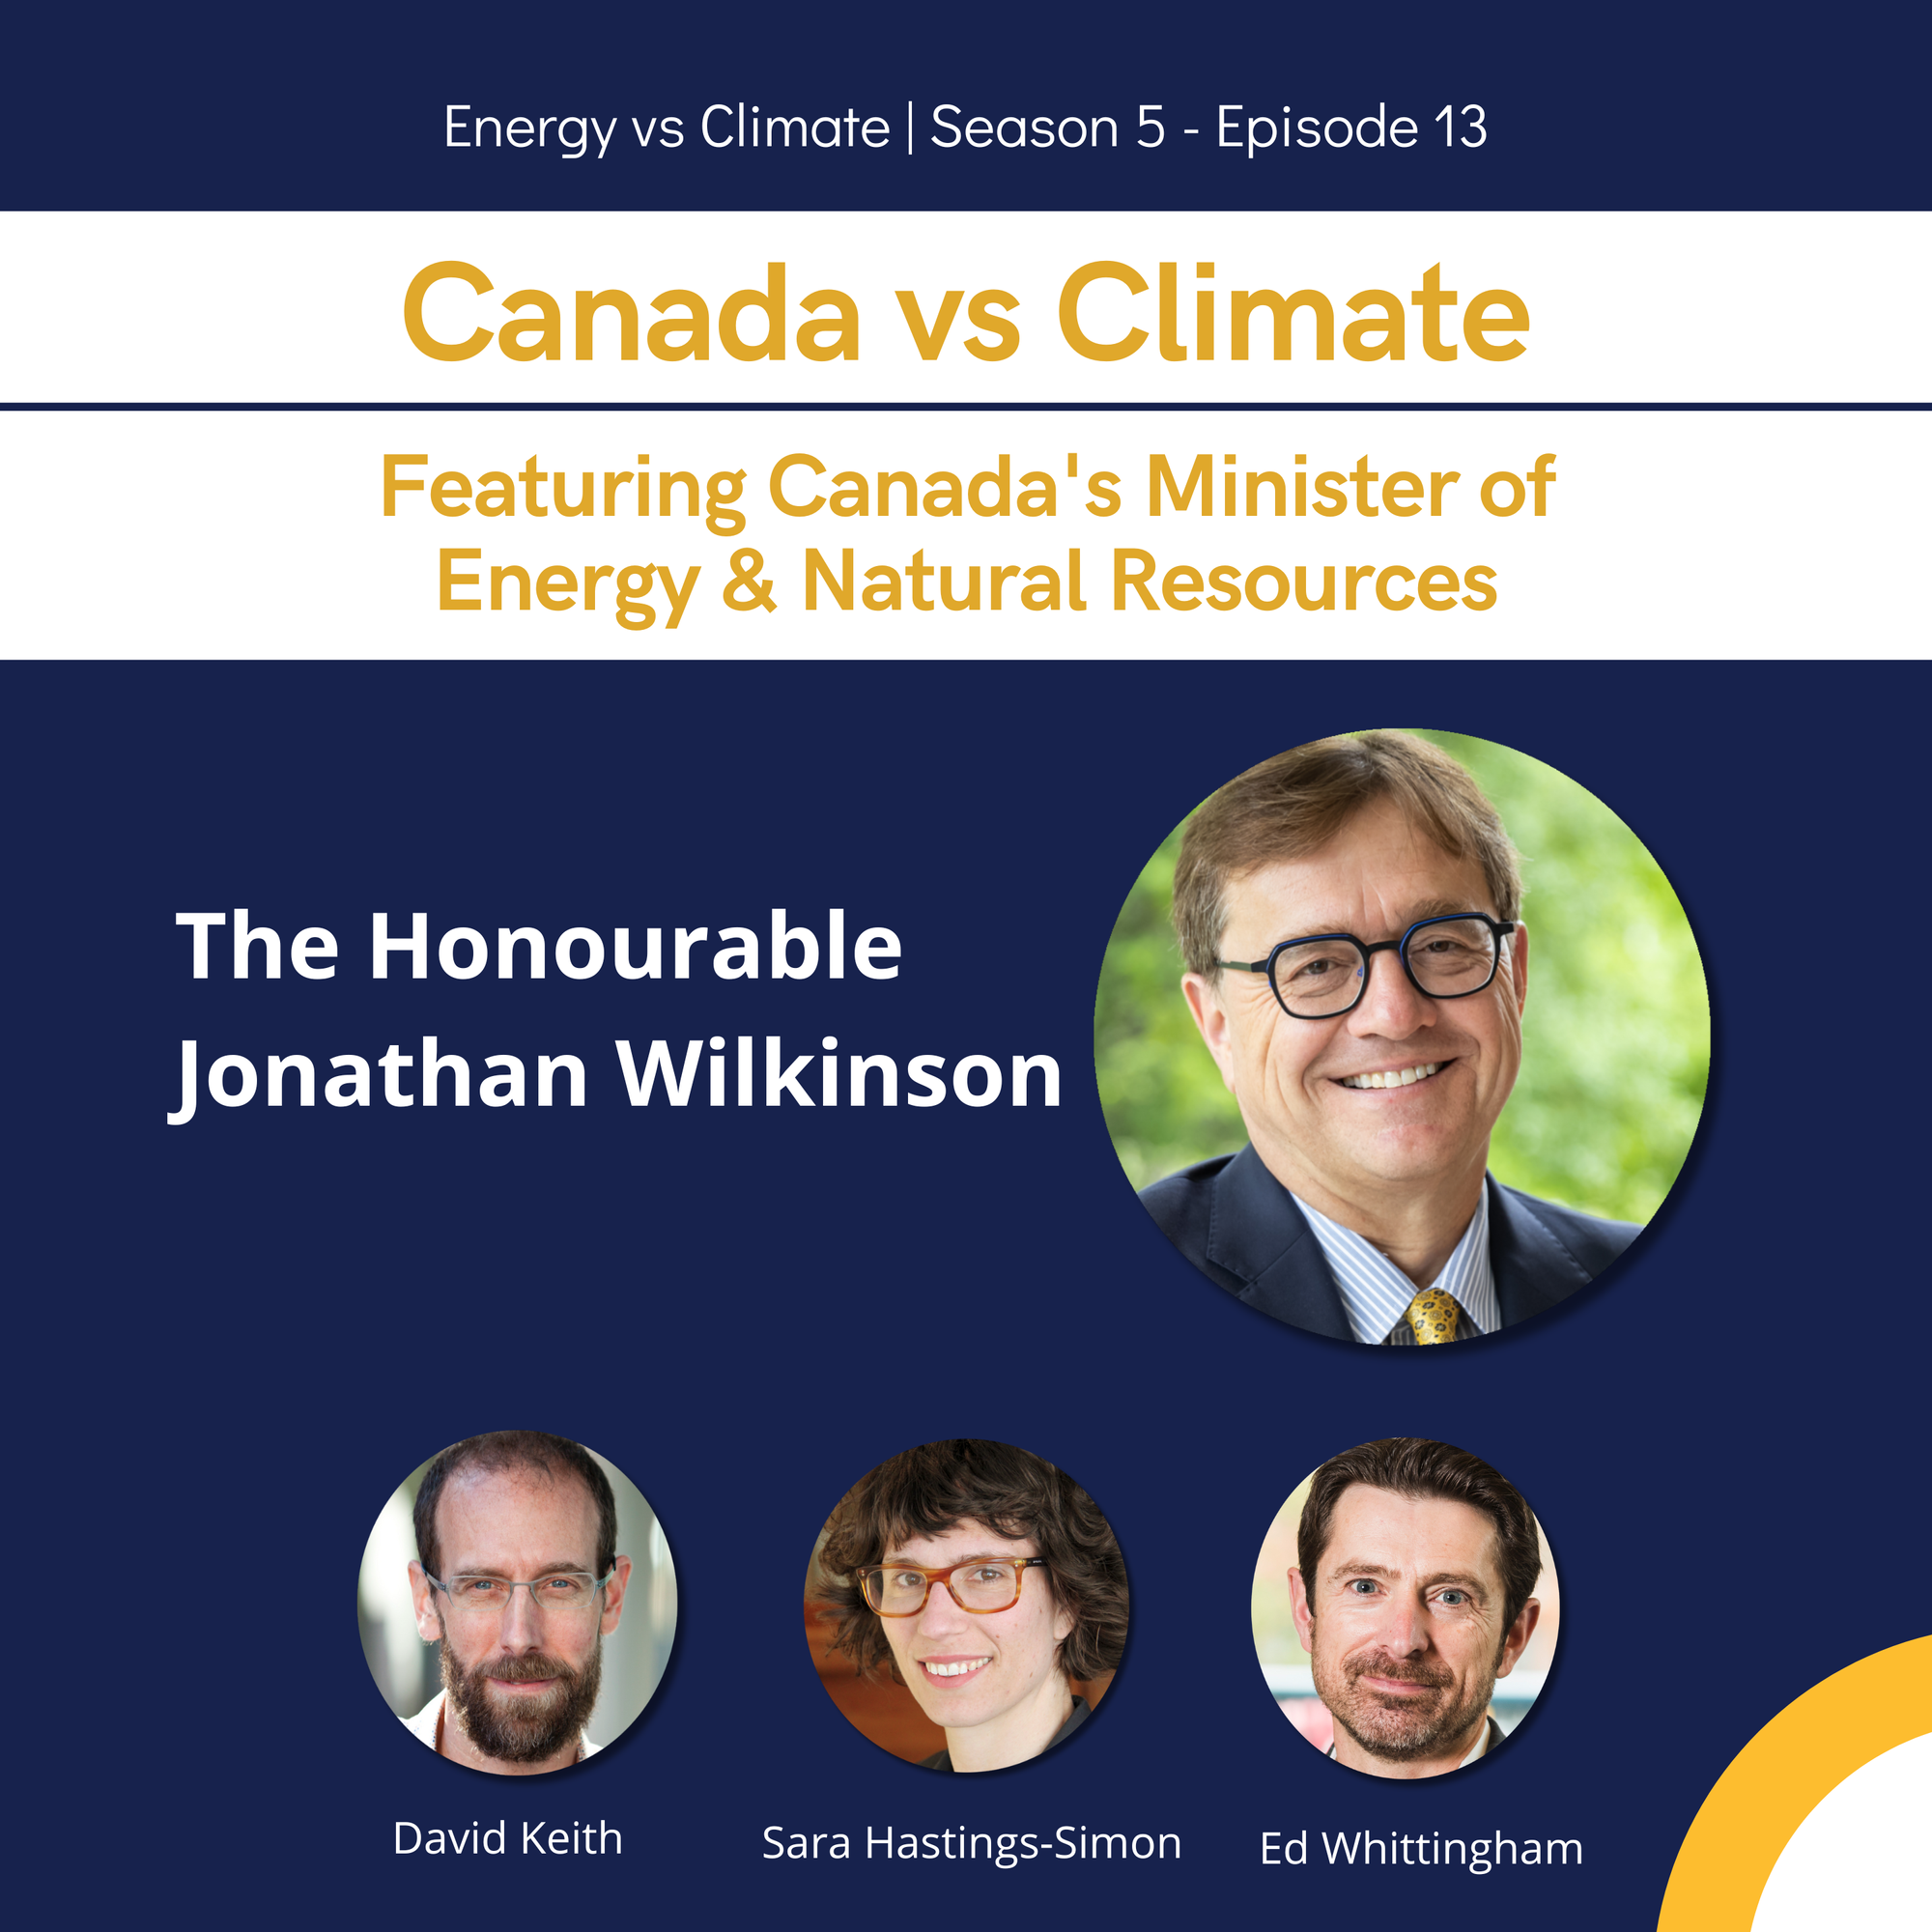 NEW EPISODE - Canada vs Climate: Minister Jonathan Wilkinson